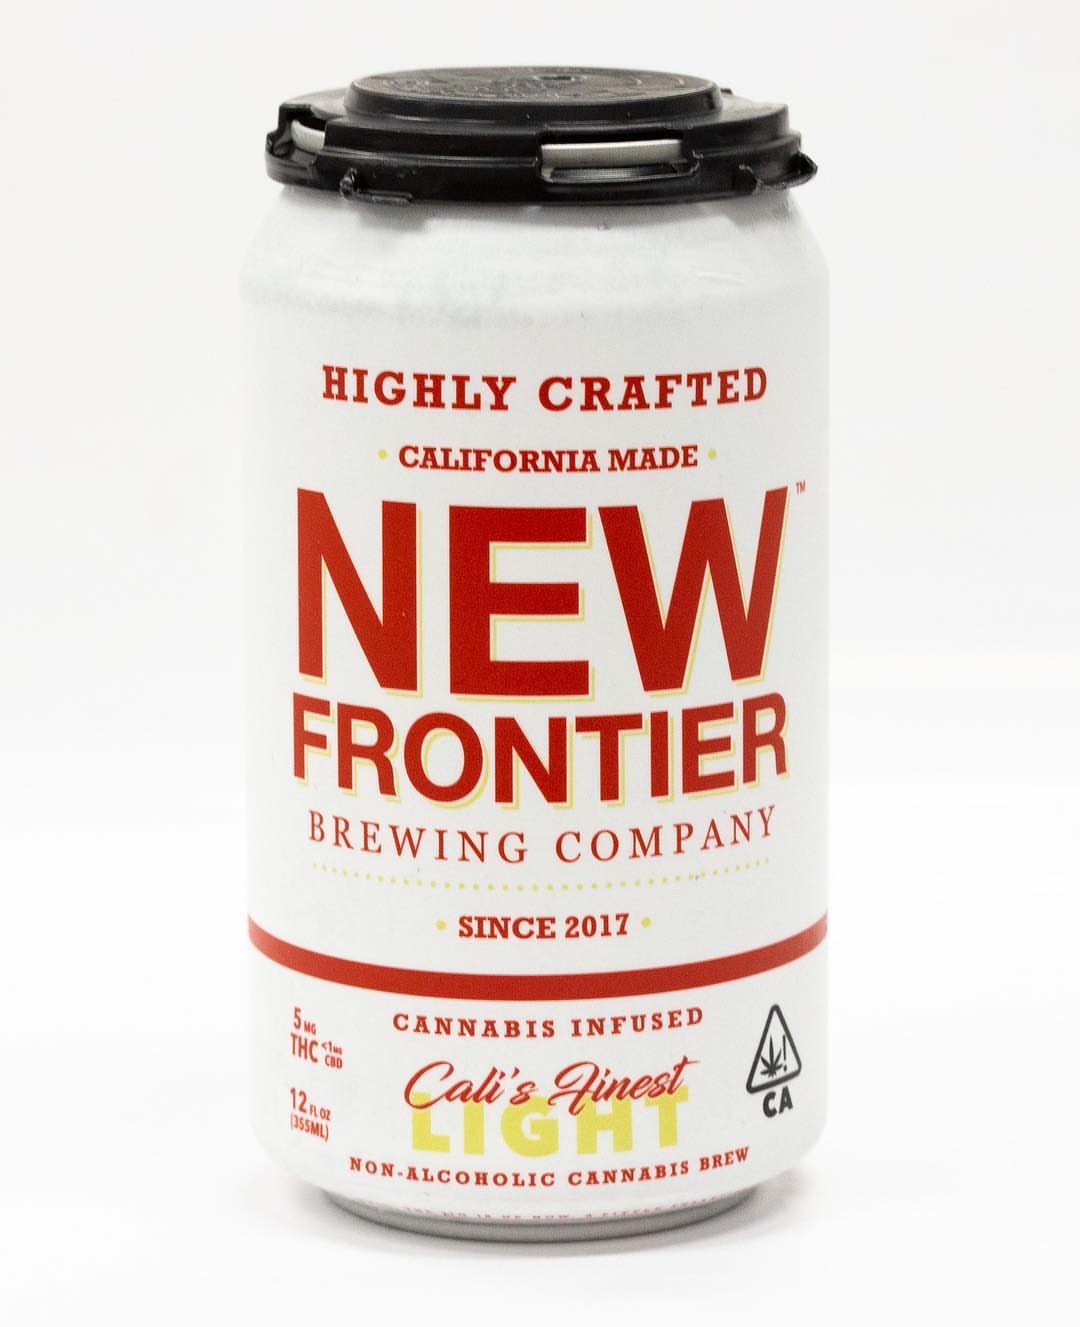 New Frontier Brewing Company Cali’s Finest Light delivery in los angeles